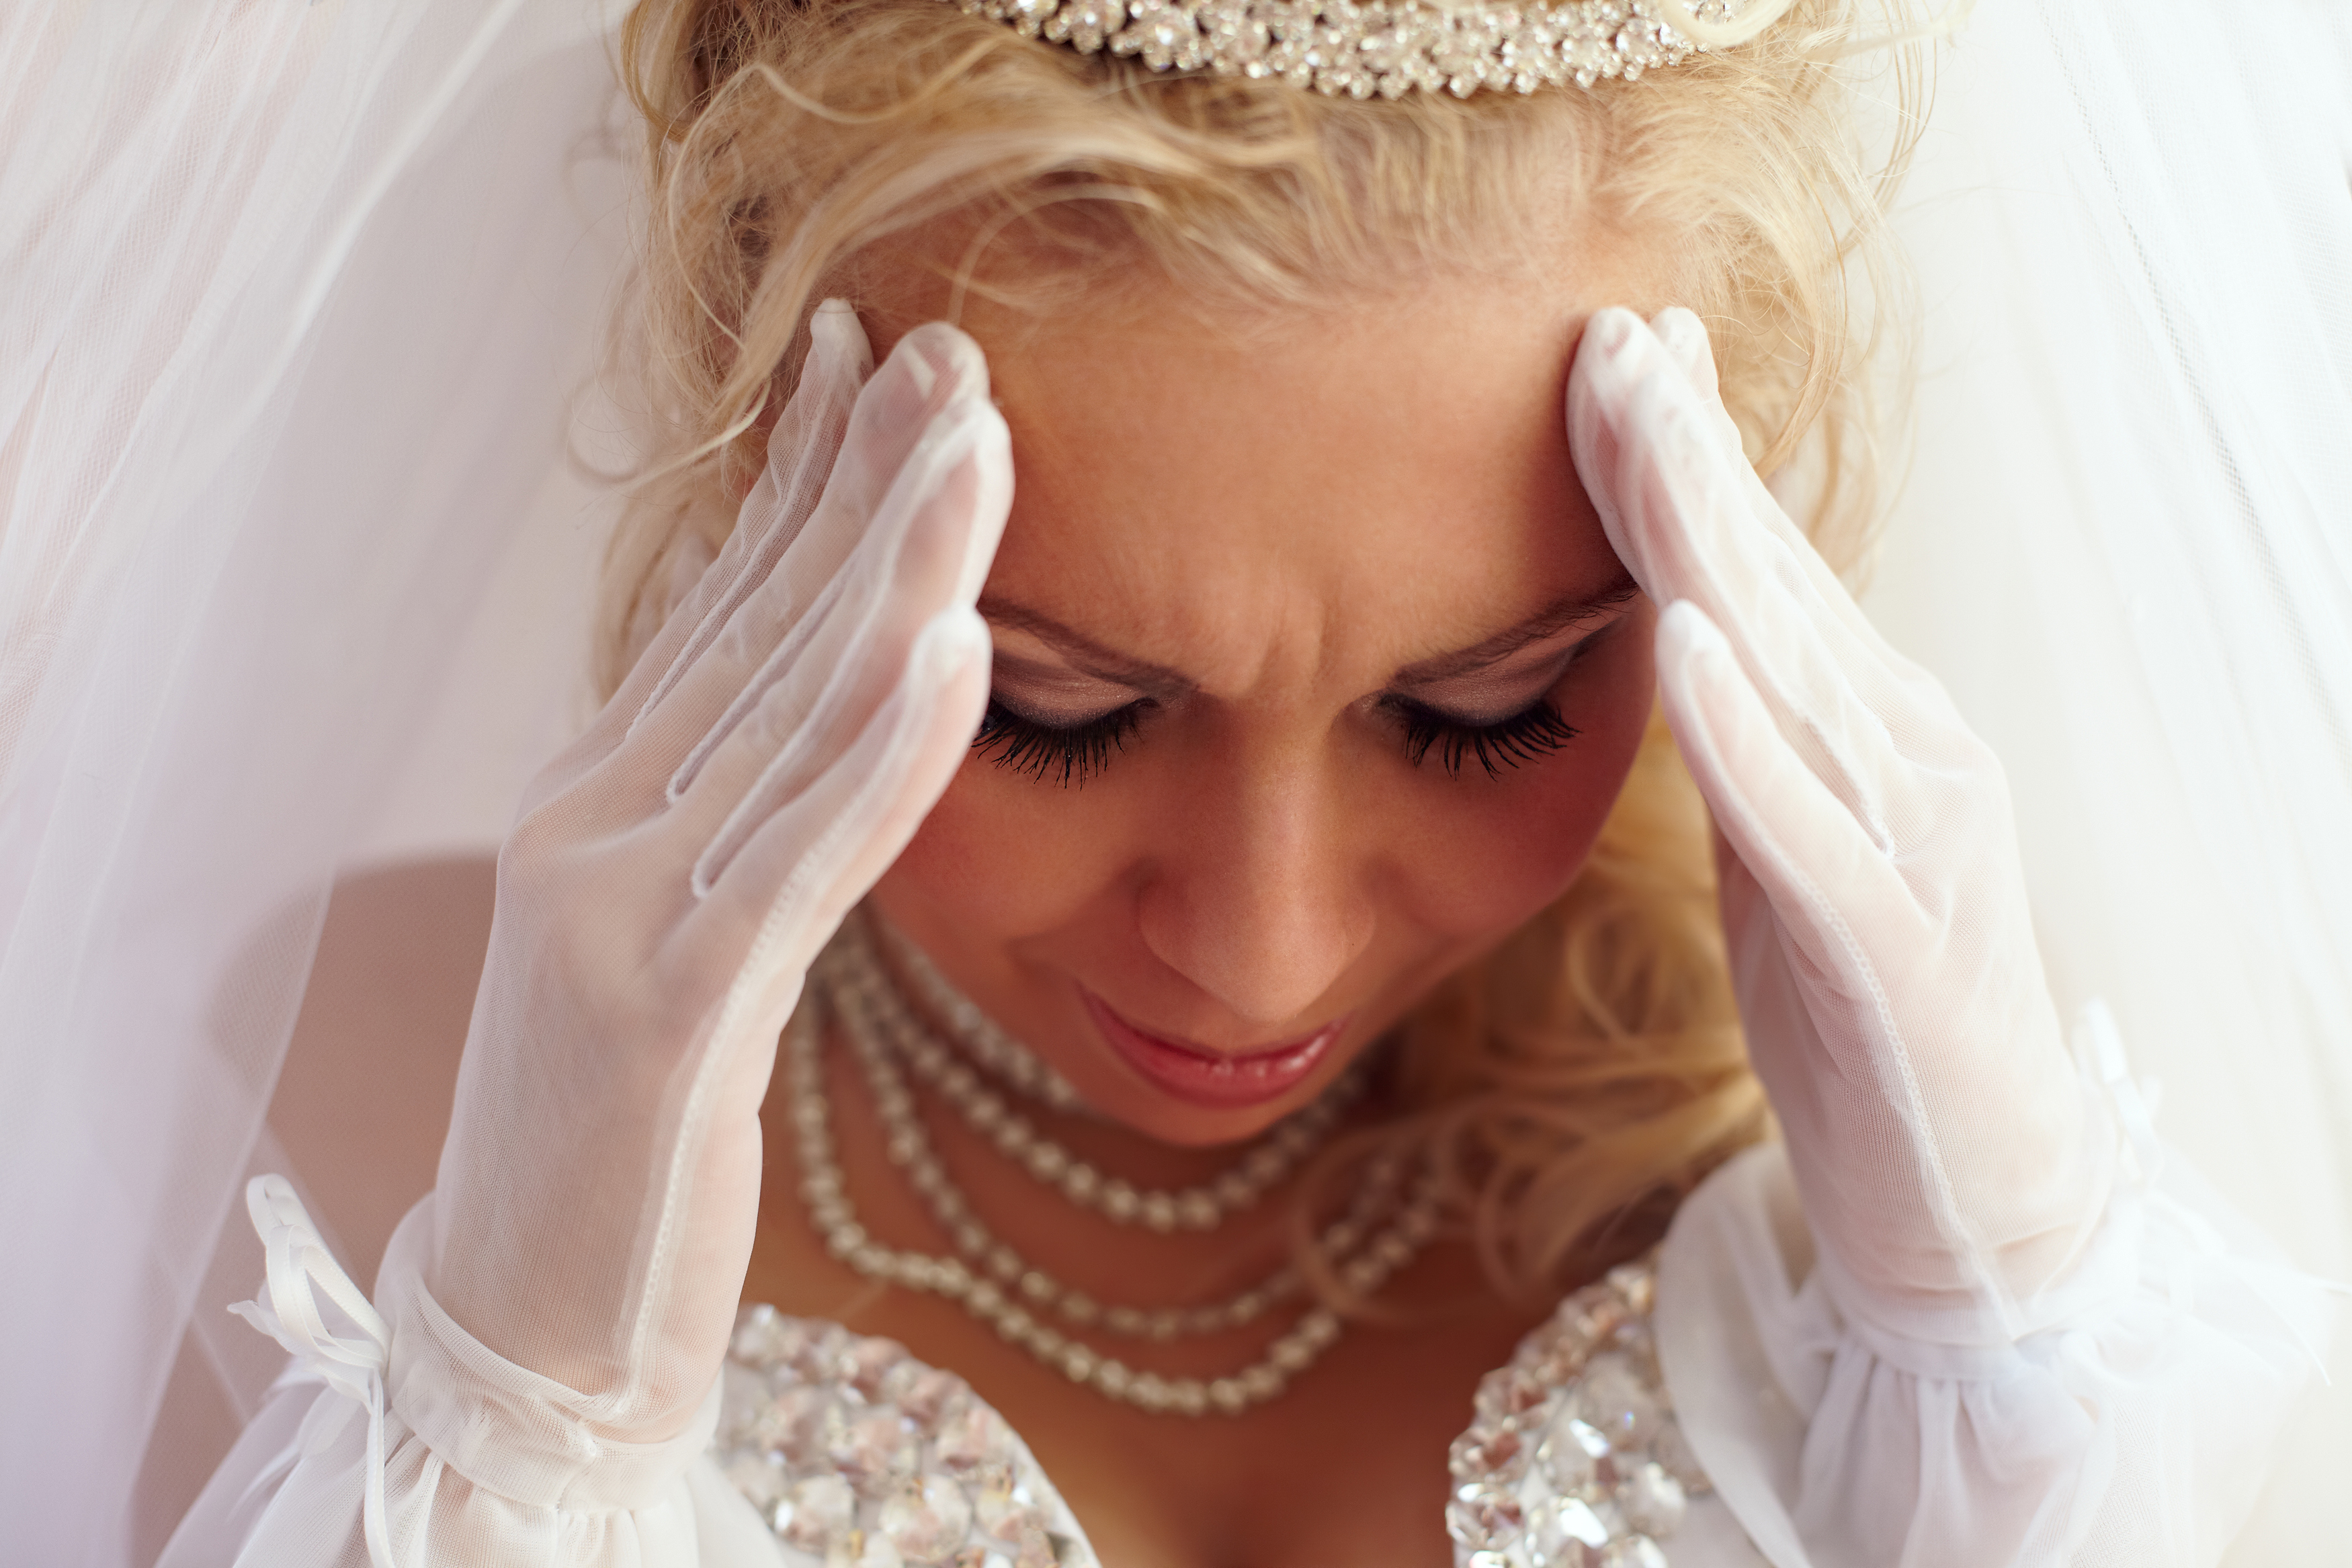 Some brides don't think they should pay for their bridesmaids dresses but others disagree